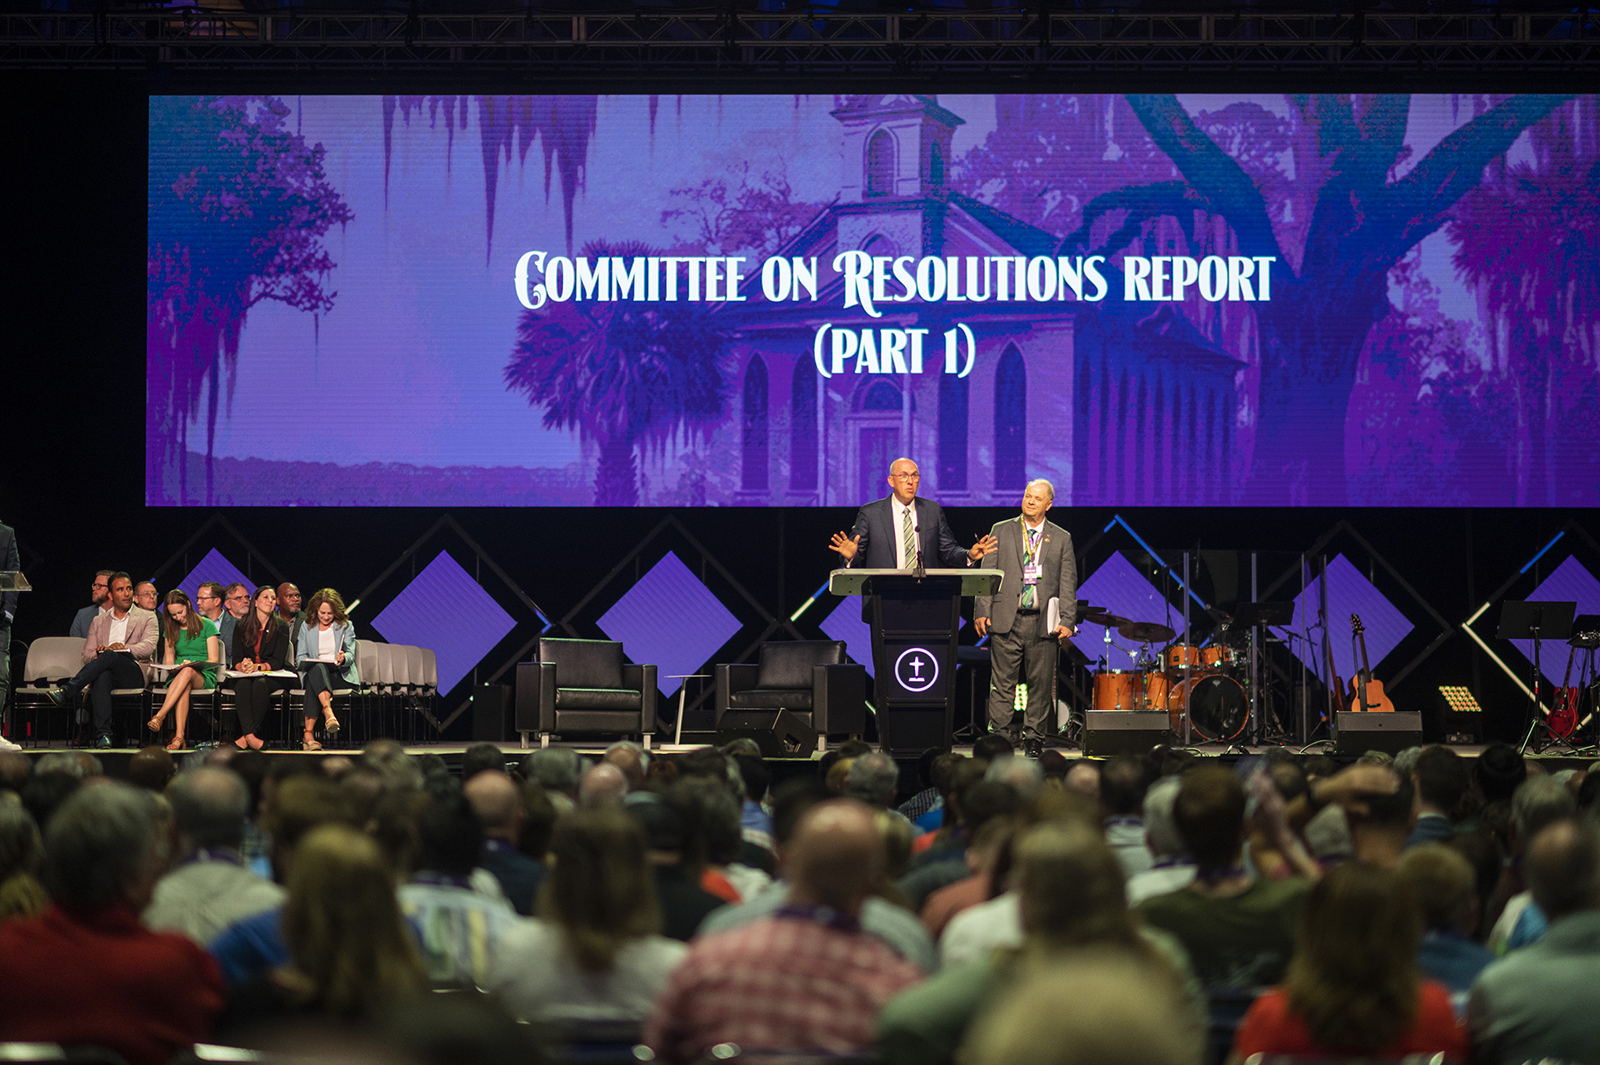 Southern Baptist Convention president Bart Barber speaks during the first day of the SBC annual meeting at the Ernest N. Morial Convention Center in New Orleans, Tuesday, June 13, 2023. RNS photo by Emily Kask